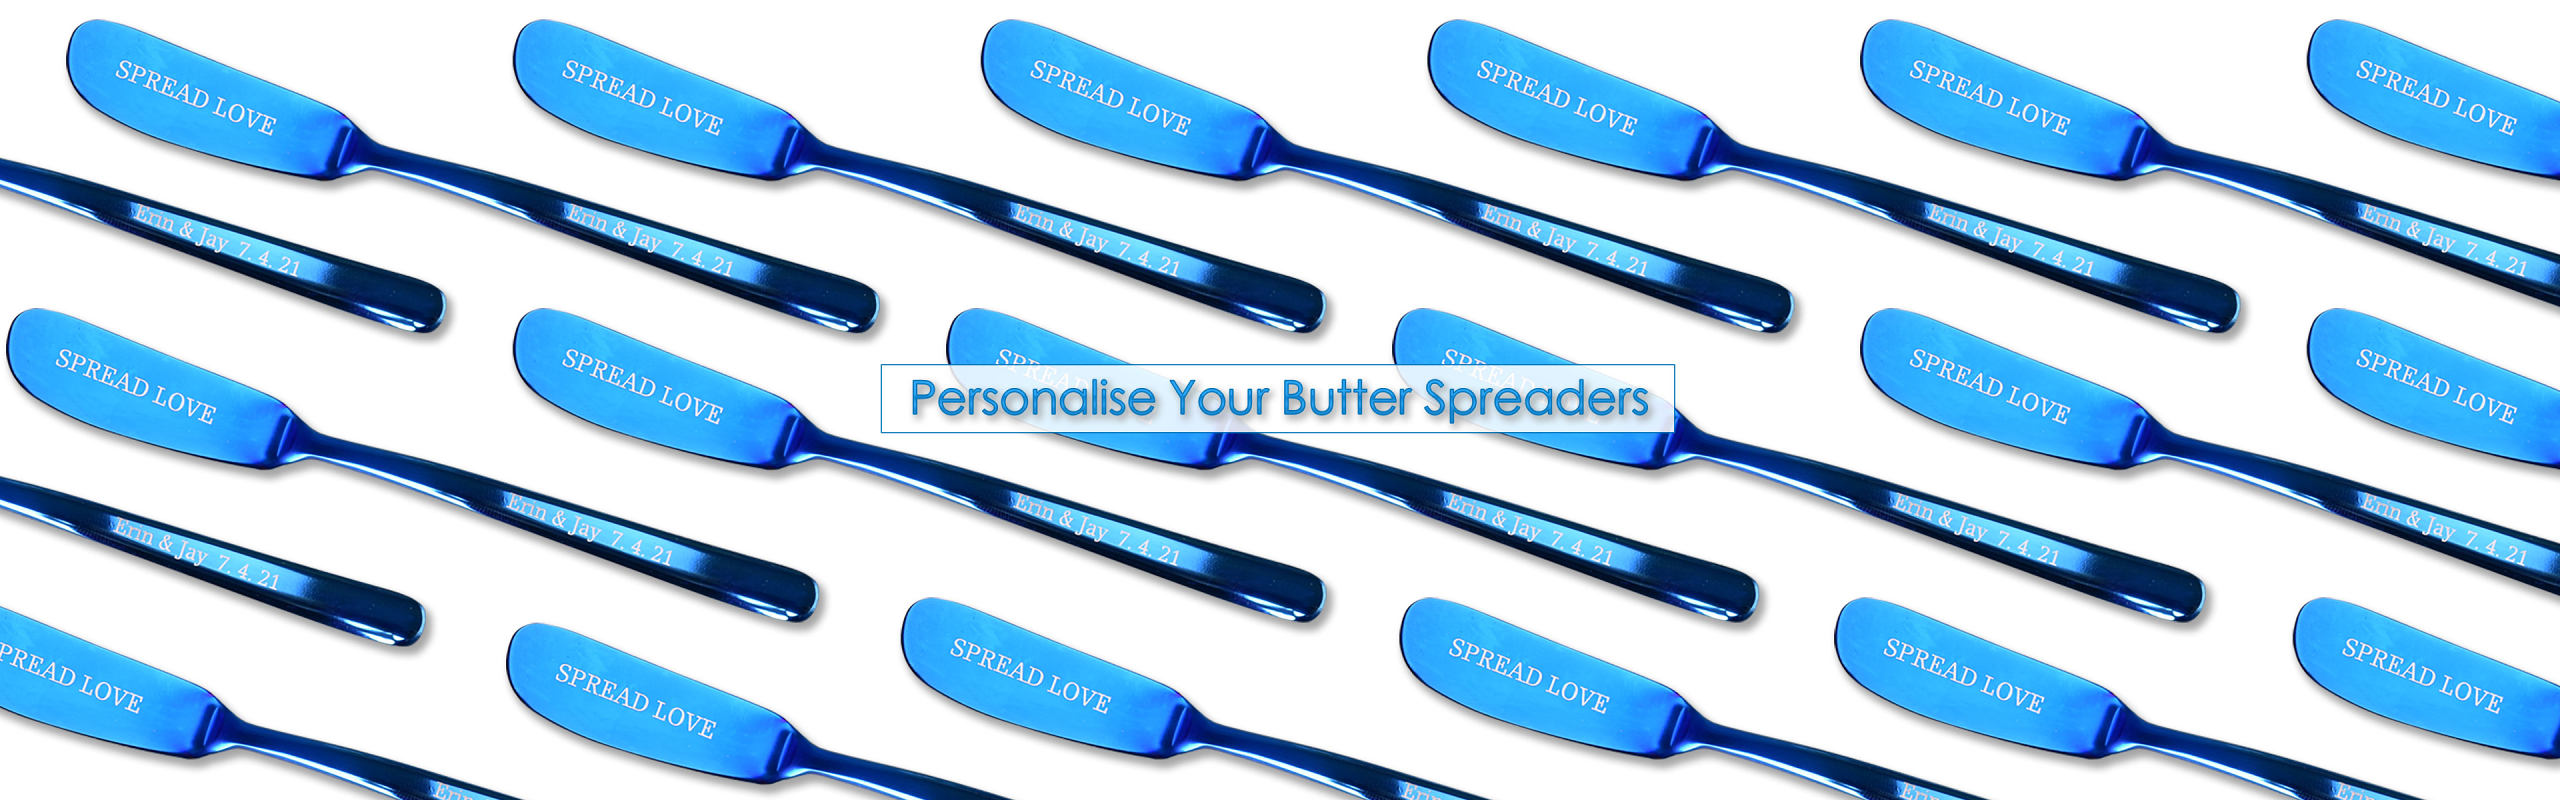 Personalized Butter Knife by Veasoon